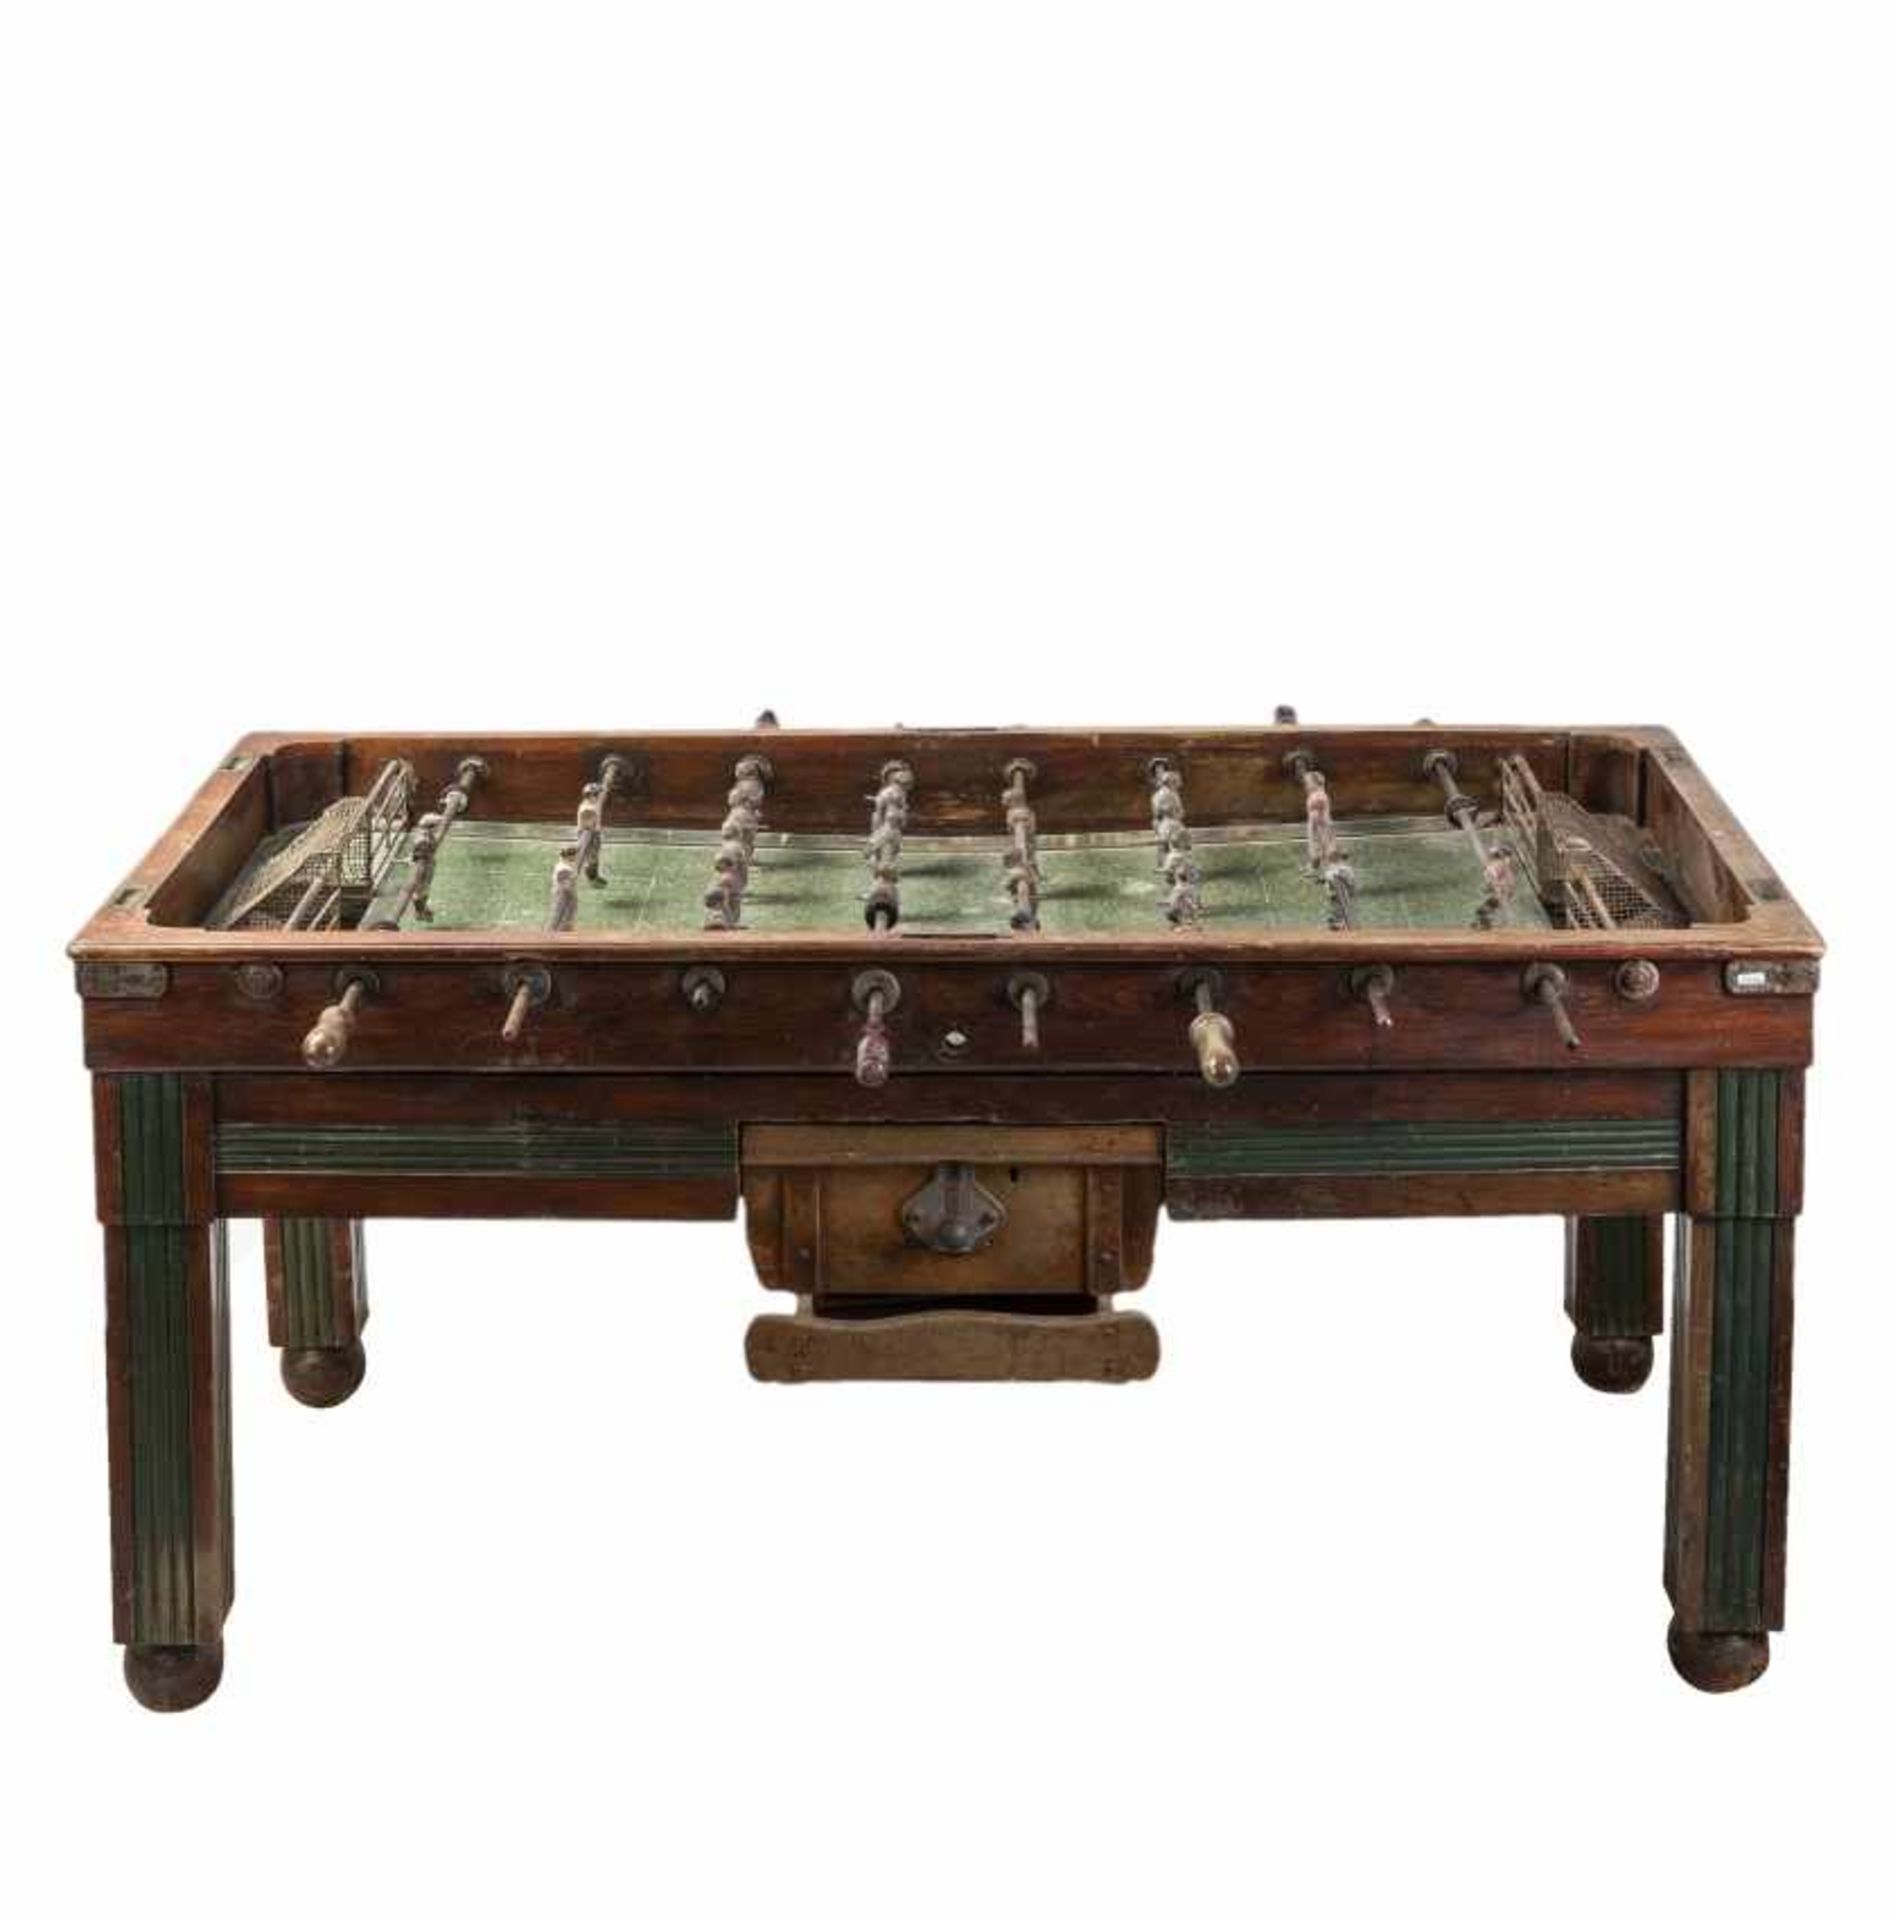 Spanish table football in wood and metal, circa 1940Spanish table football in wood and metal,